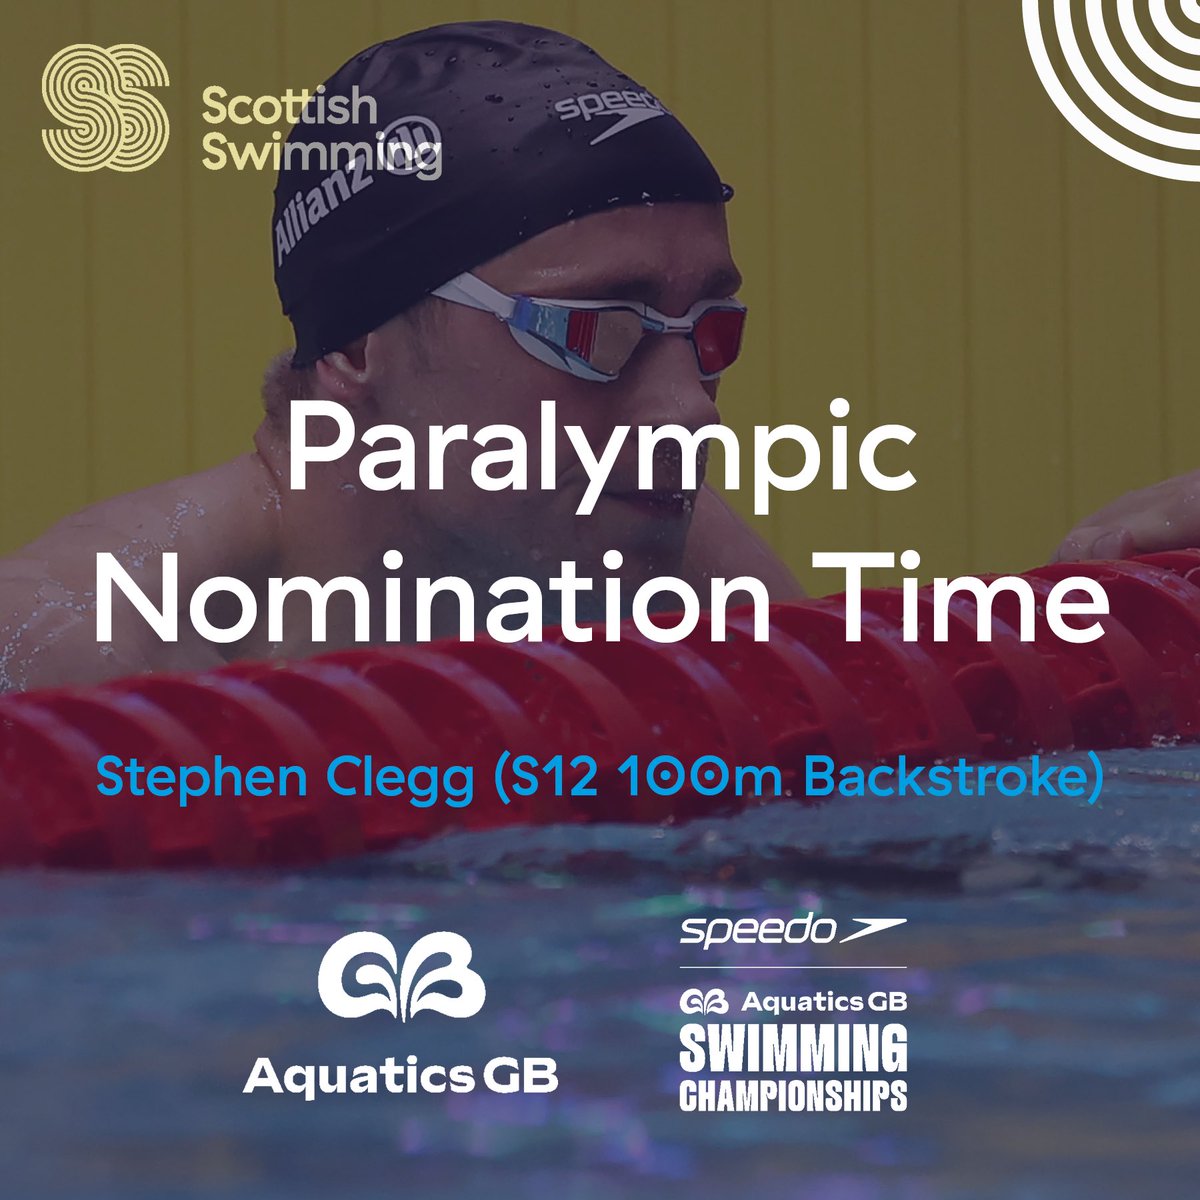 🚨 Paralympic Nomination Time! Stephen Clegg (@UofESwimming) secures a time under the Paris nomination standard (1:00.83) on his way to MC Gold! 🏆 Well done Stephen! 🇫🇷